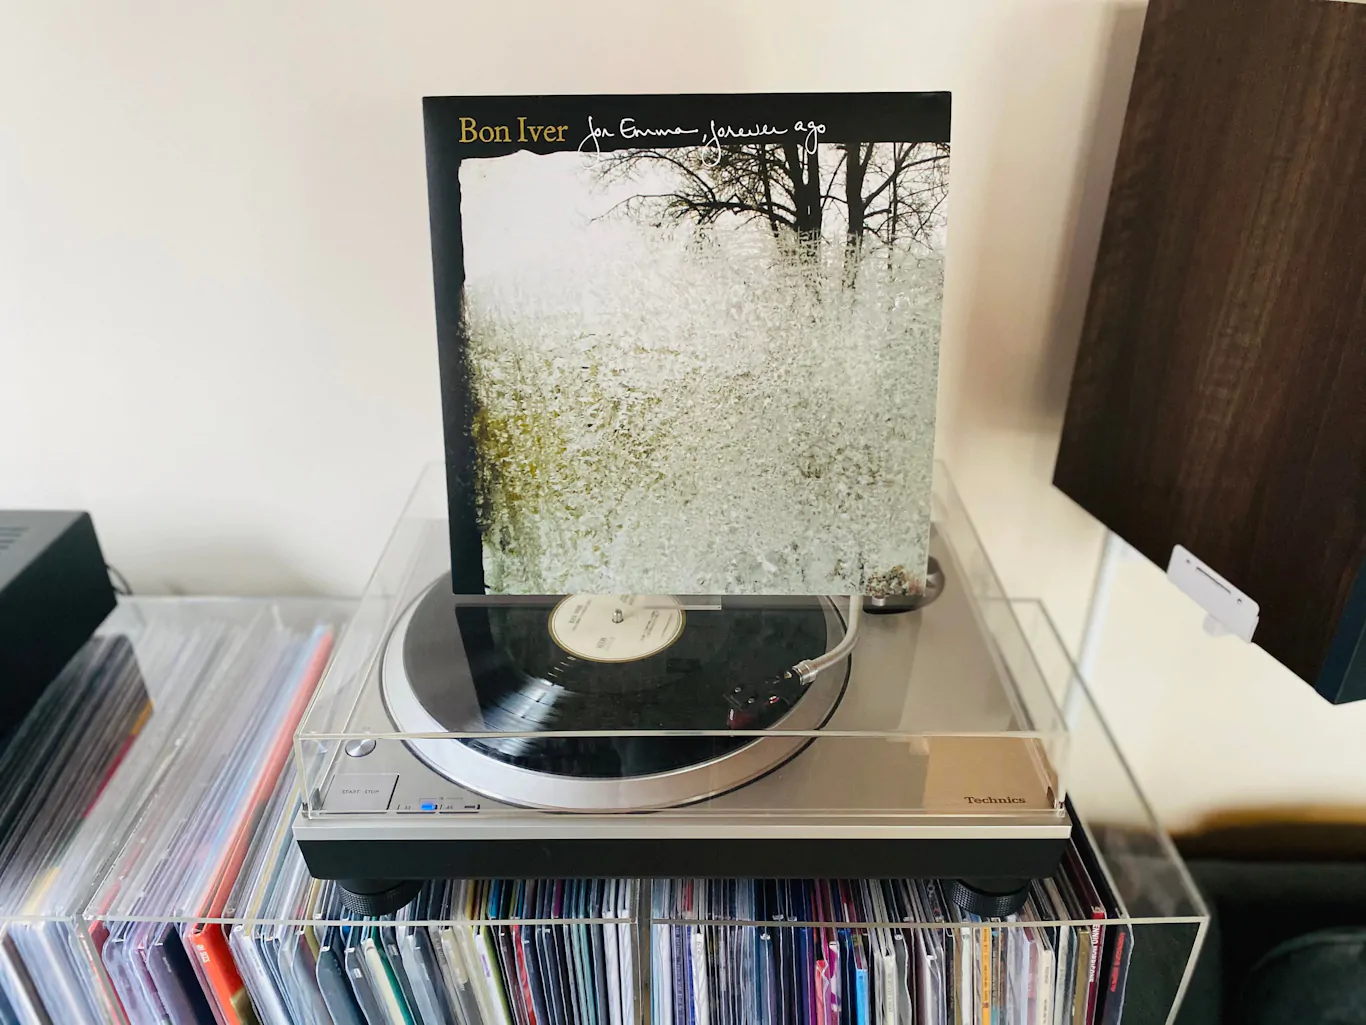 ON THE TURNTABLE: Bon Iver – For Emma, Forever Ago